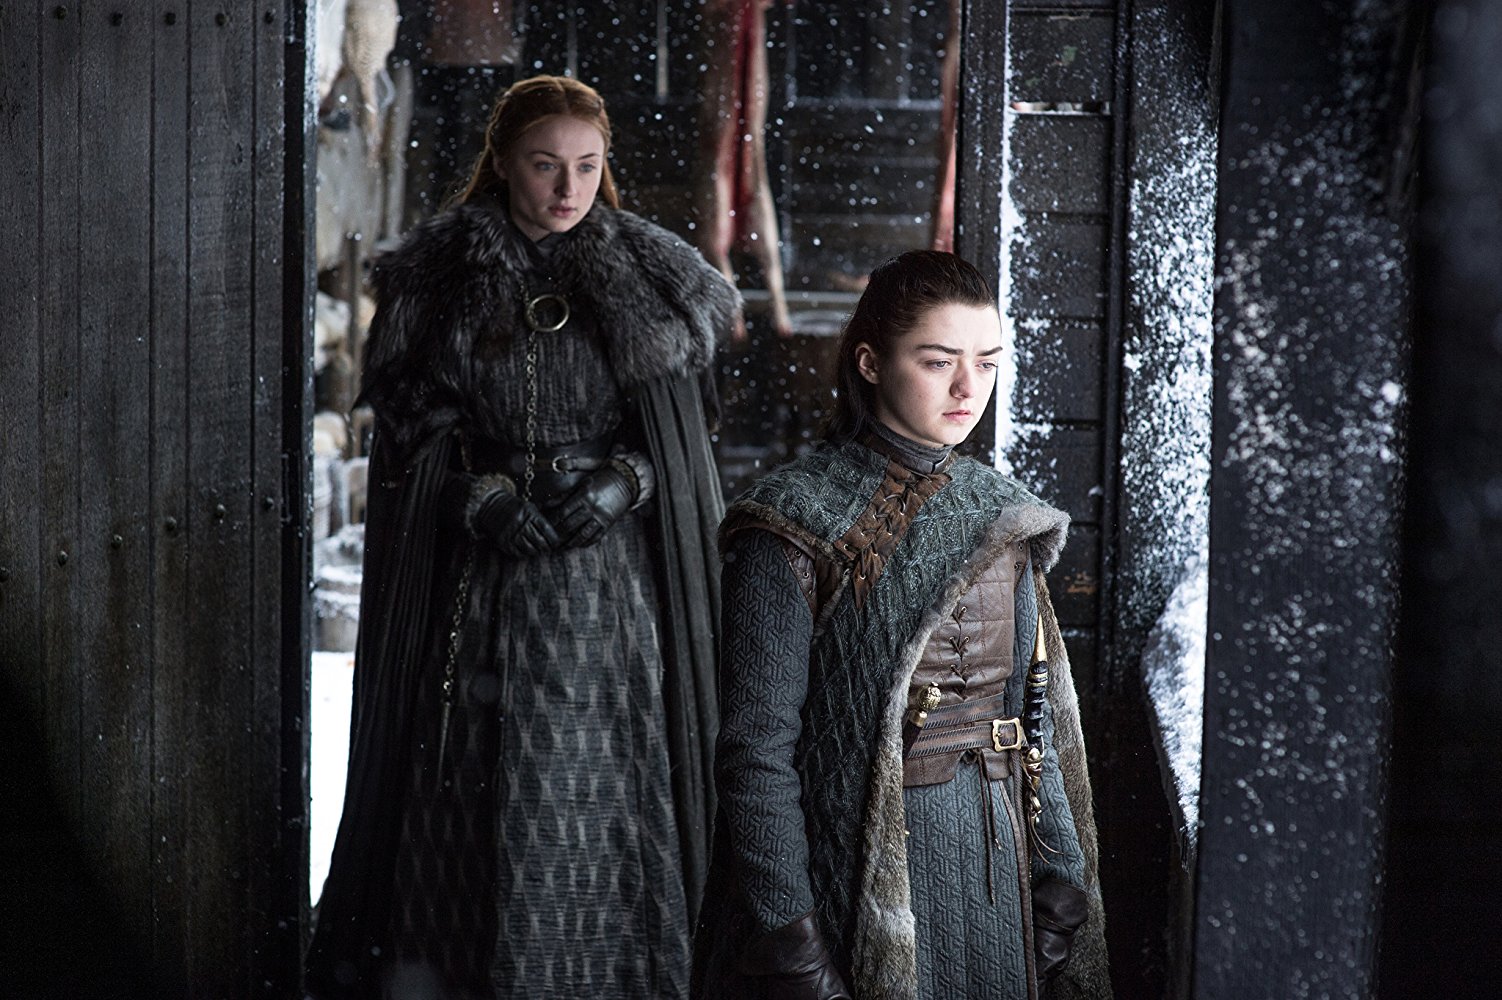 PHOTO: Sophie Turner and Maisie WIlliams in Season 7 of Game of Thrones.